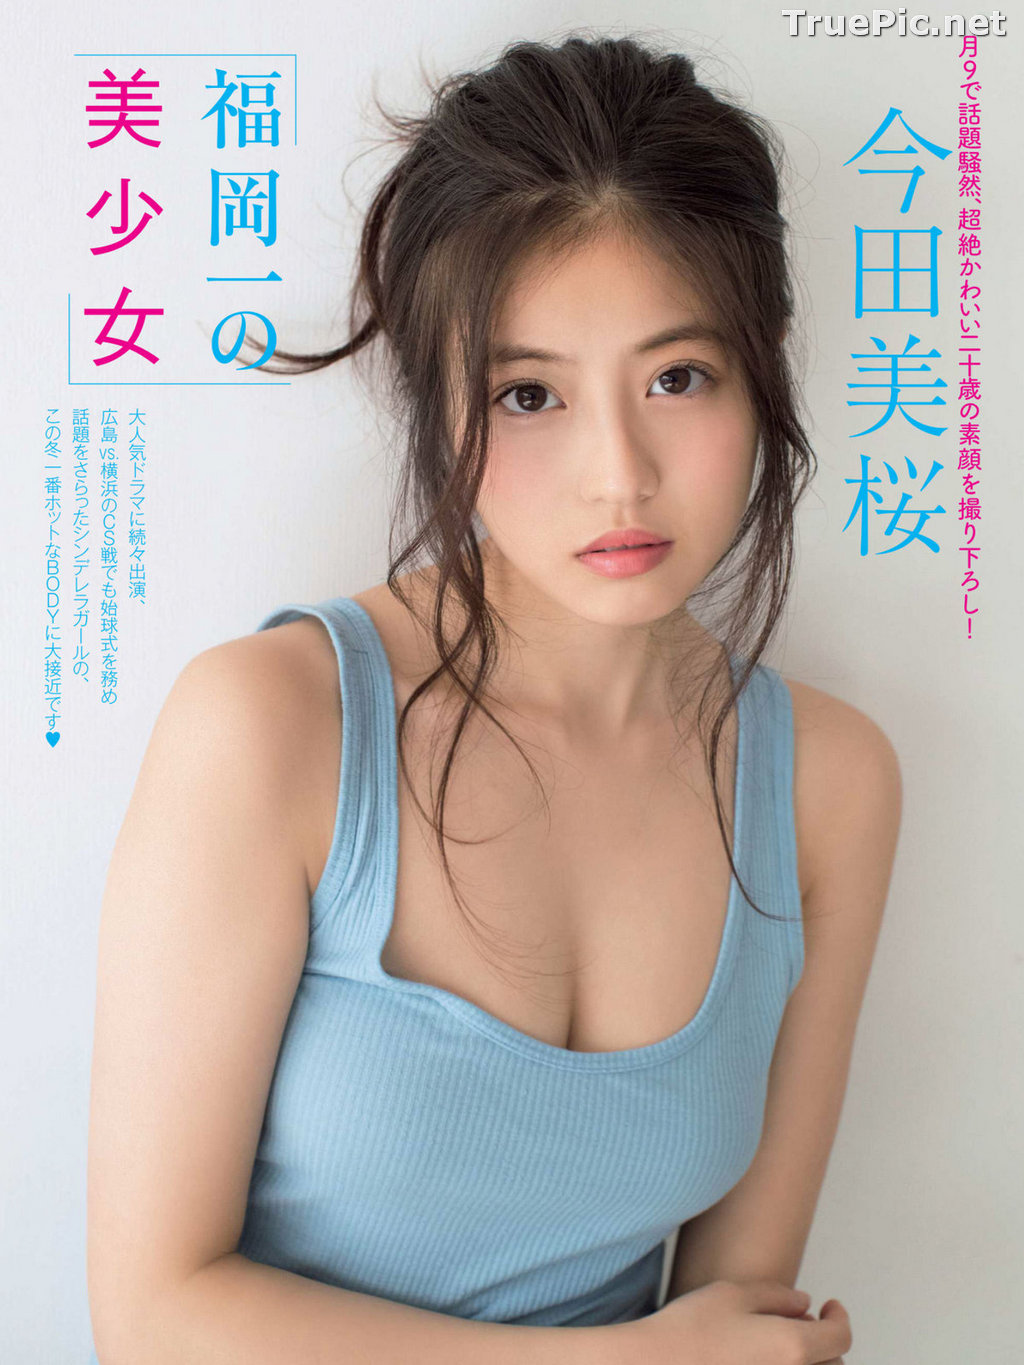 Image Japanese Actress and Model - Mio Imada (今田美櫻) - Sexy Picture Collection 2020 - TruePic.net - Picture-240